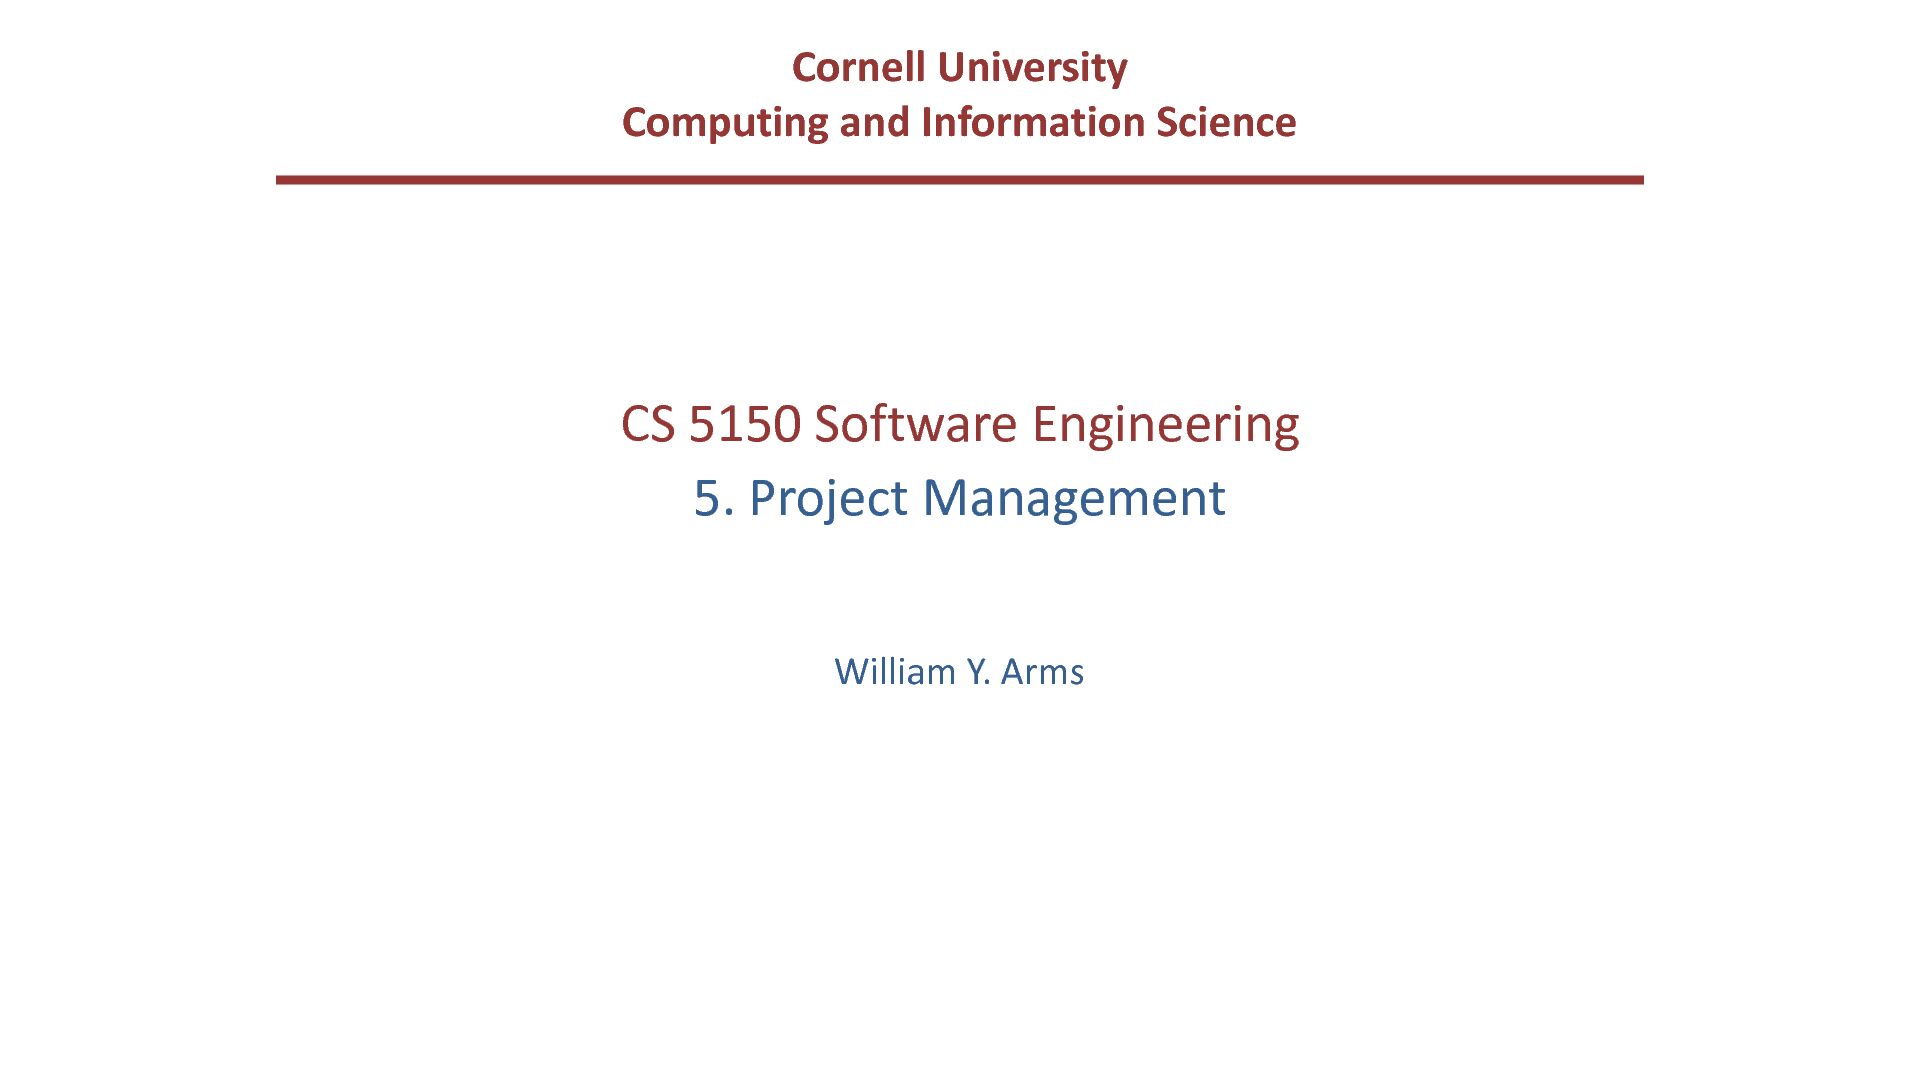 CS 5150 Software Engineering 5 Project Management